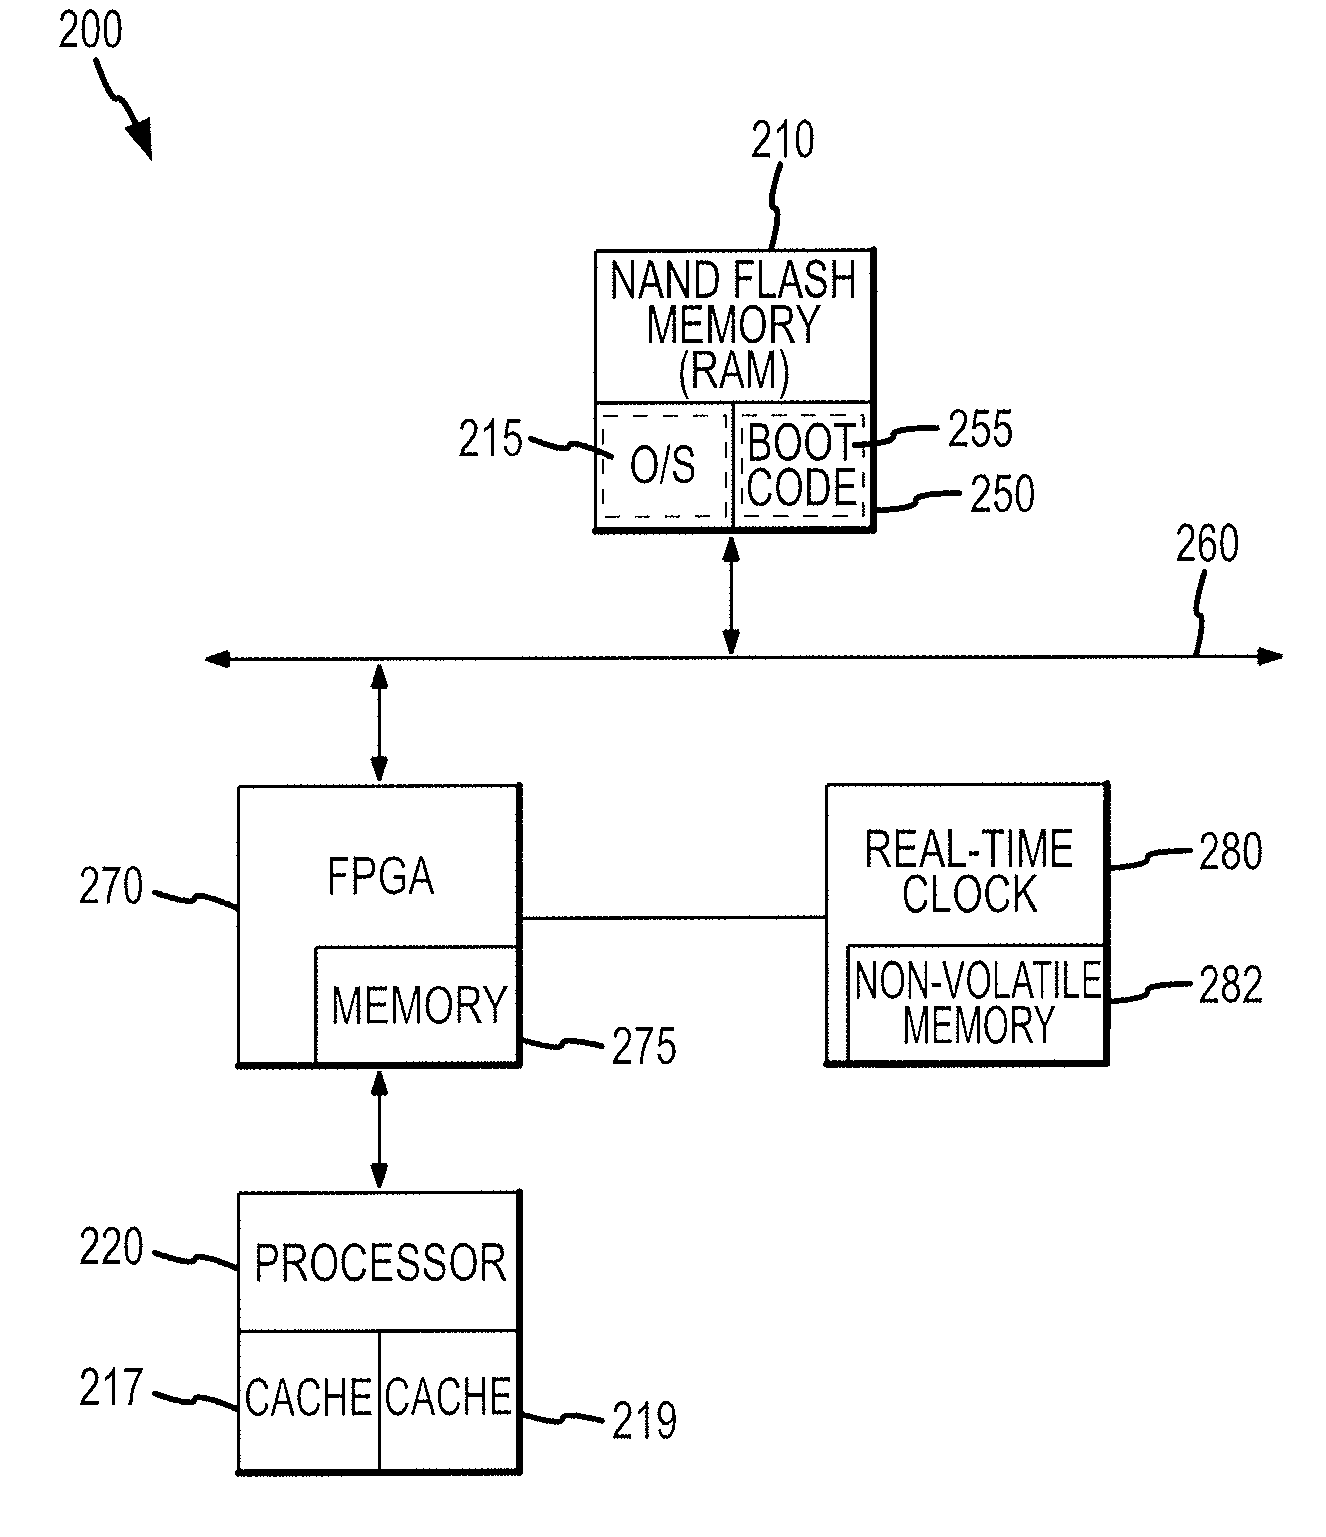 Apparatus and Method for Booting a Computing Device from a NAND Memory Device